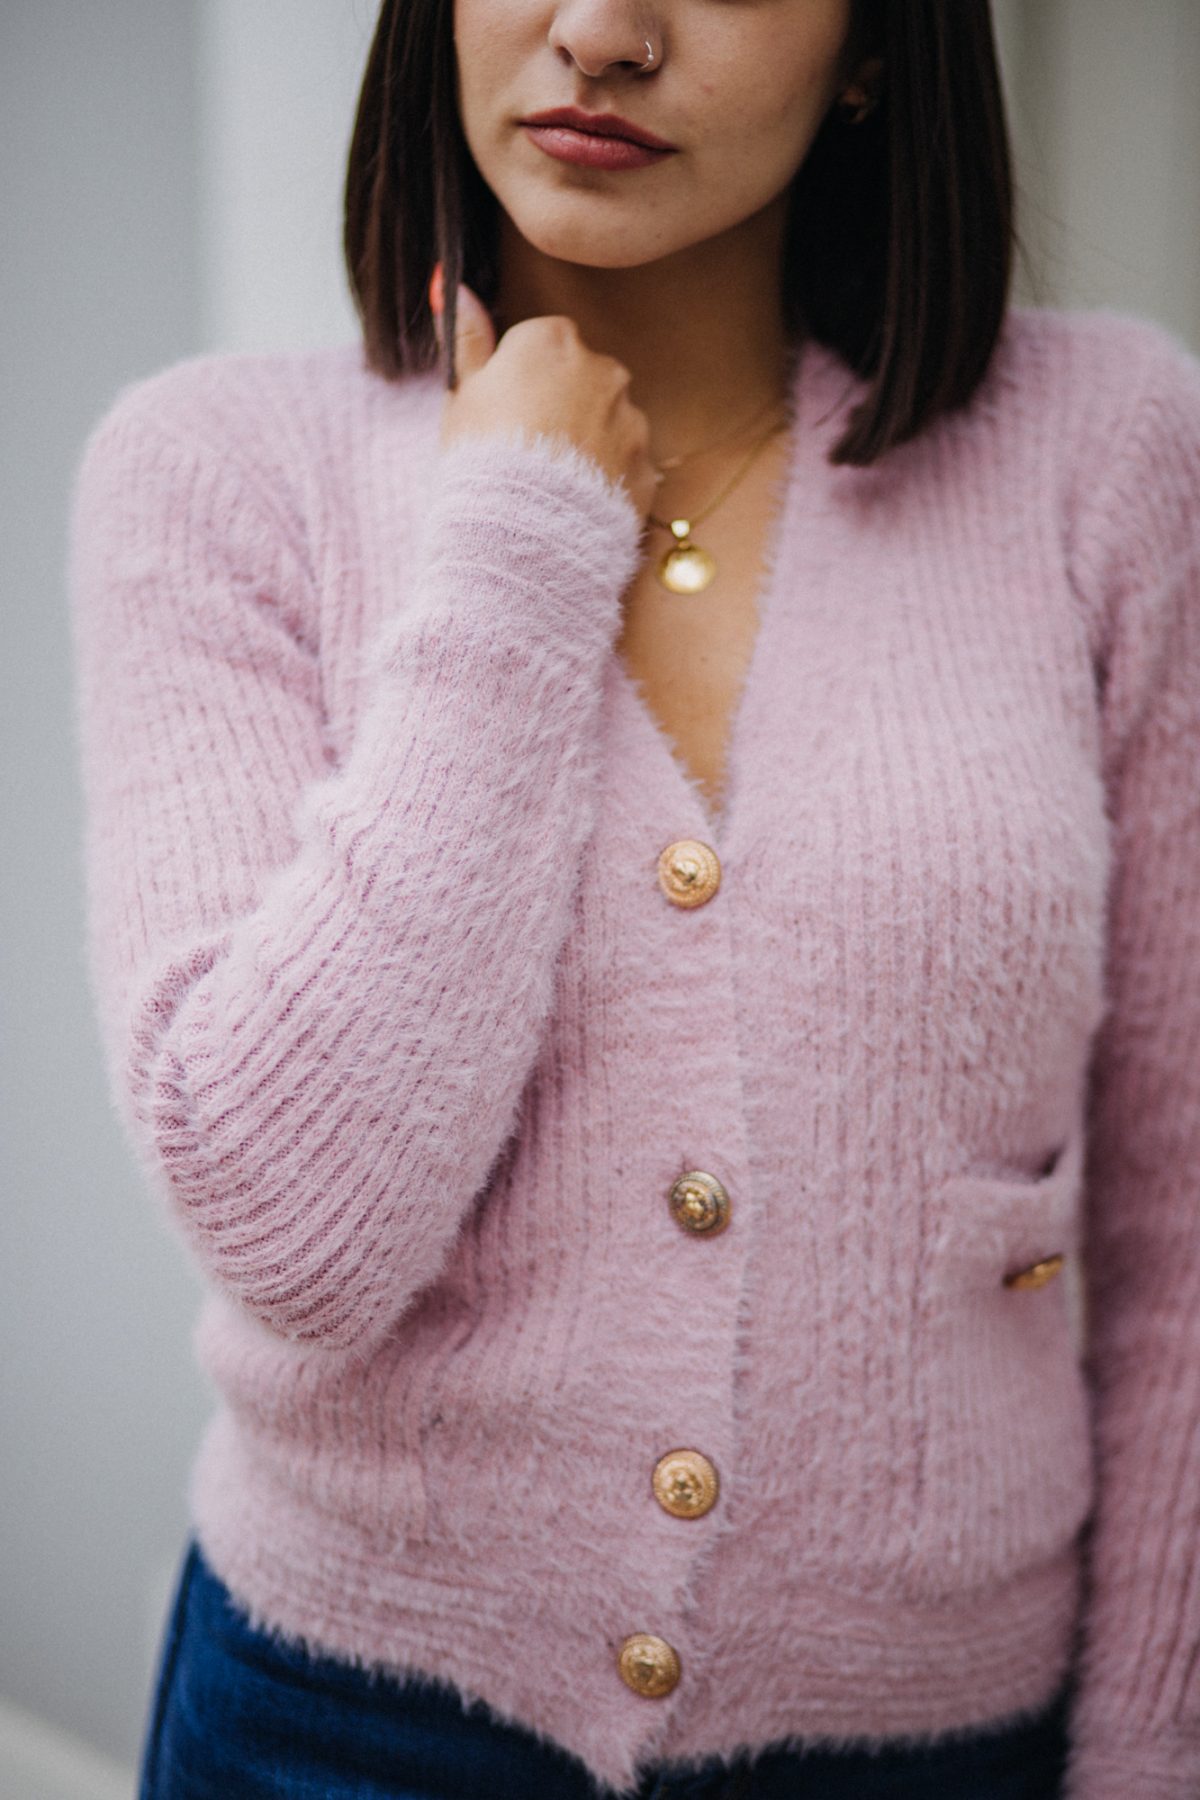 Woolen cardigan with gold buttons